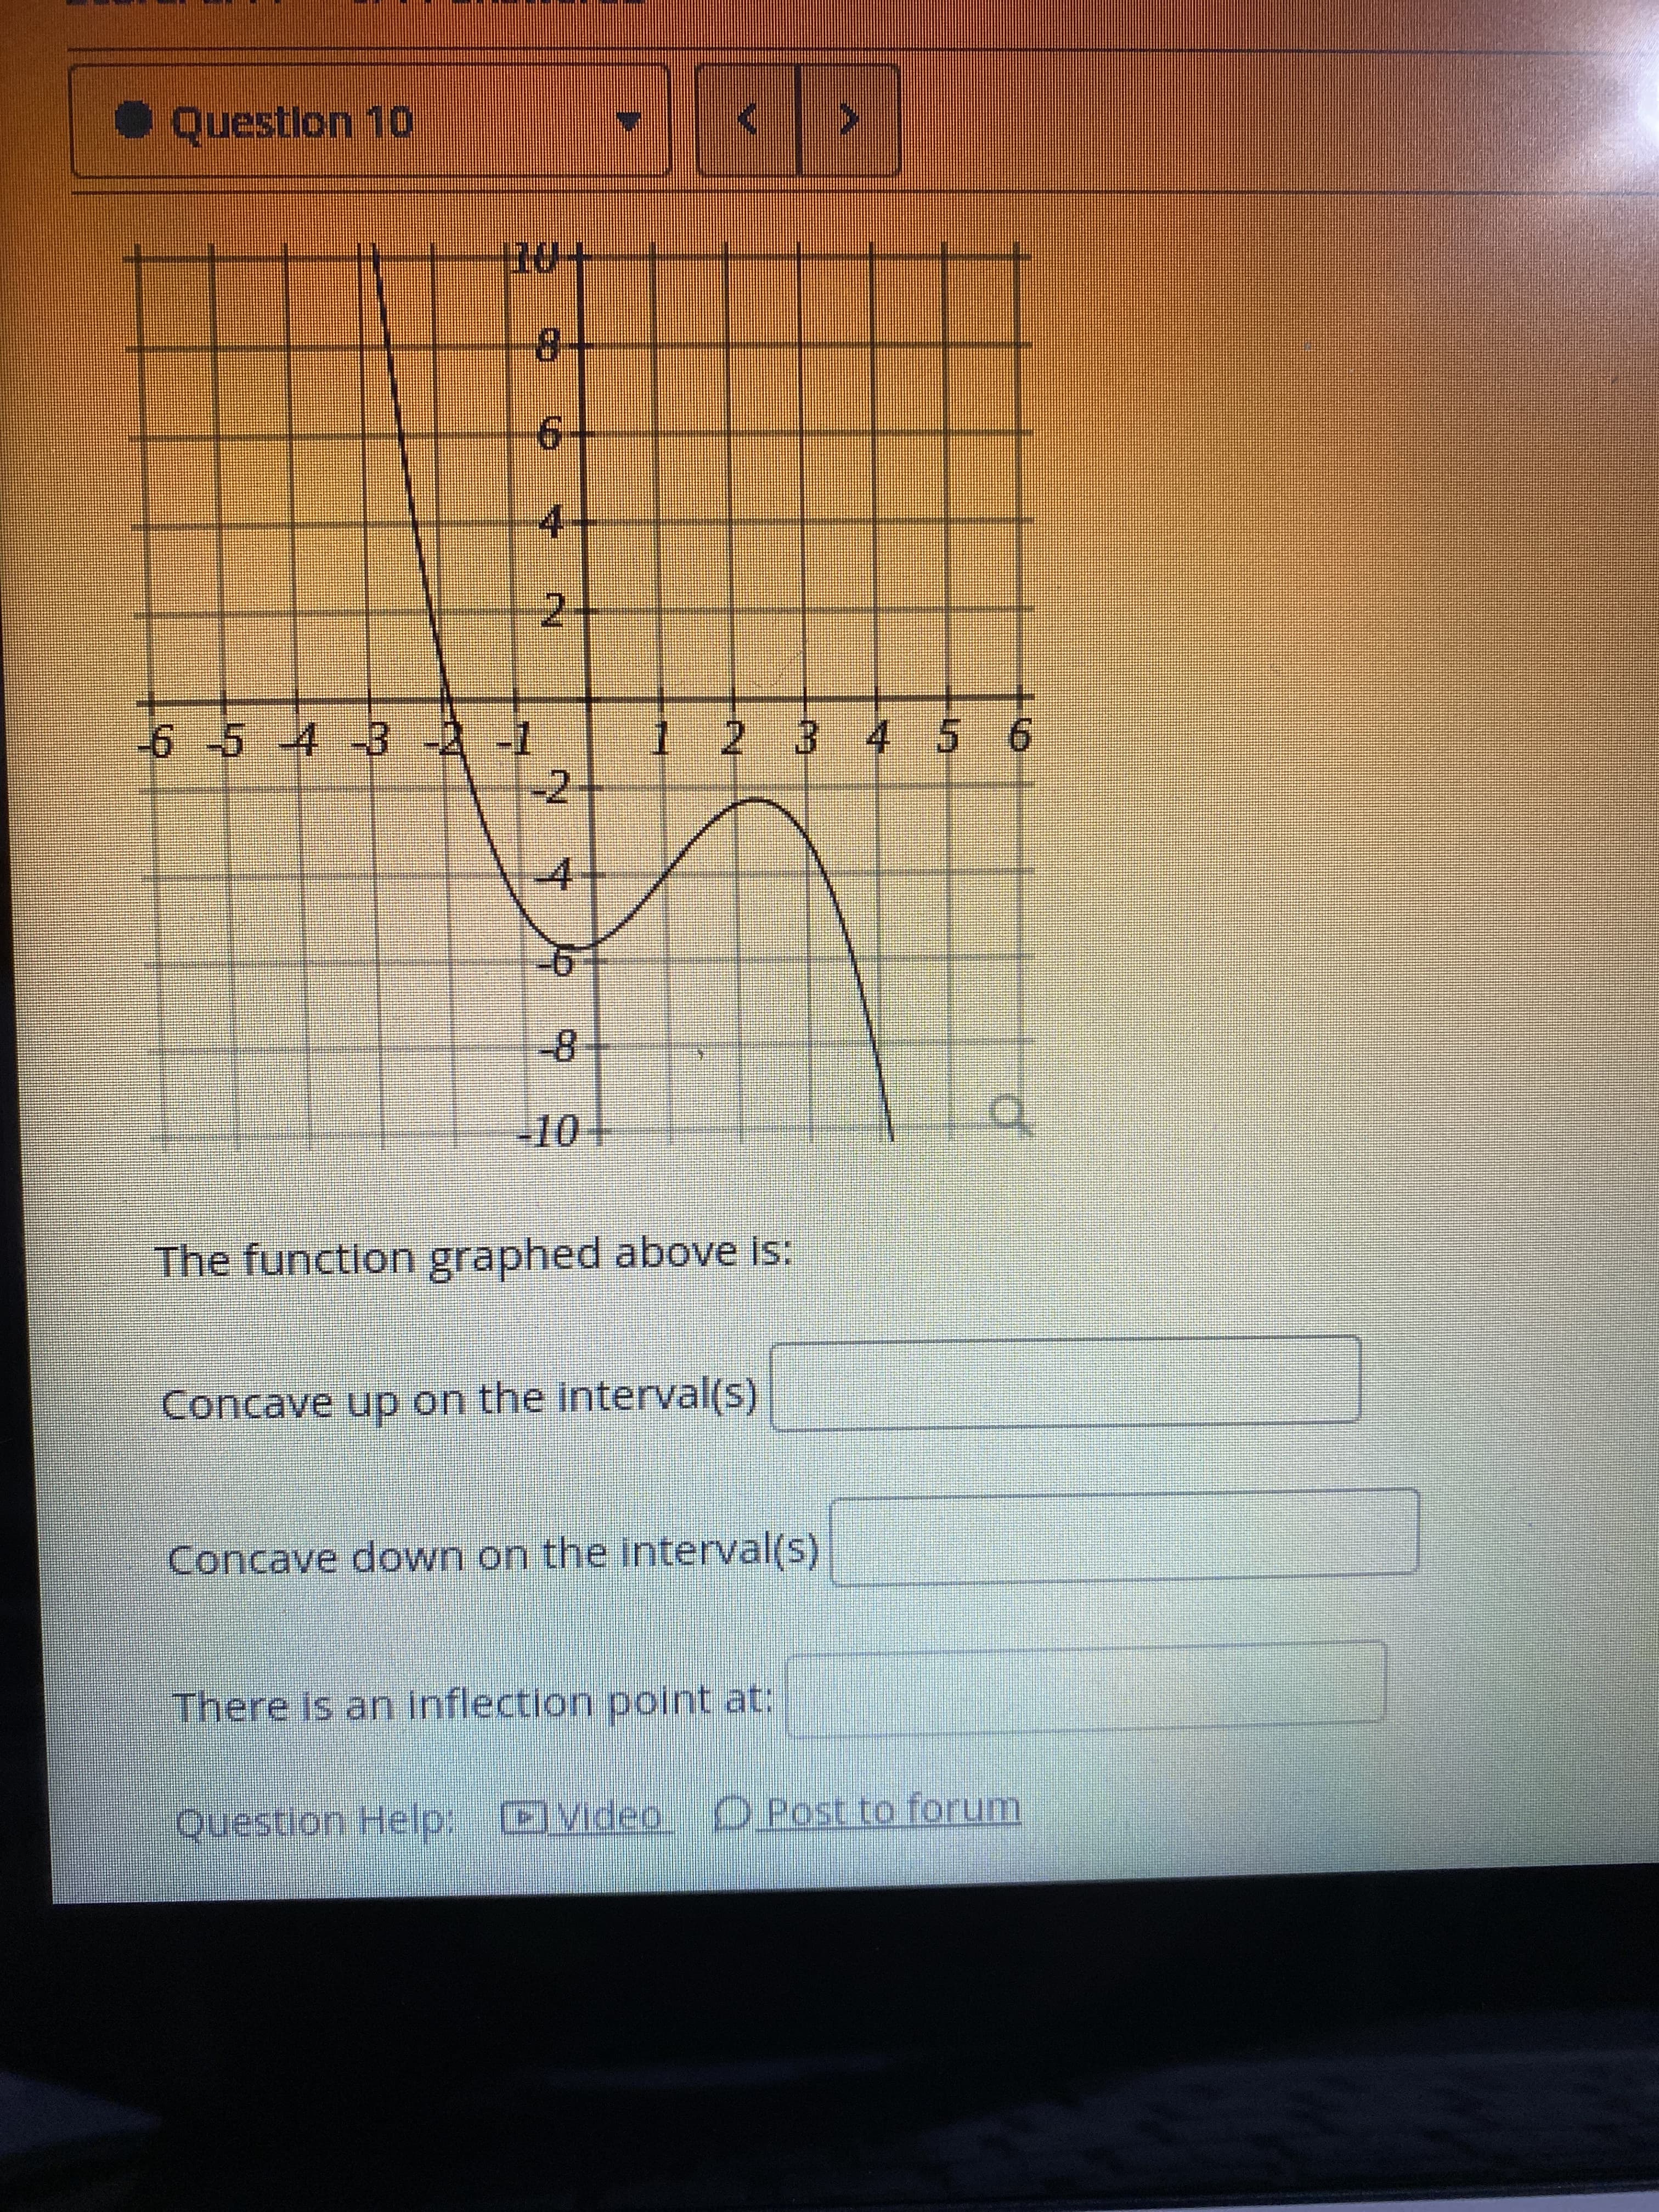 The function graphed above is:
